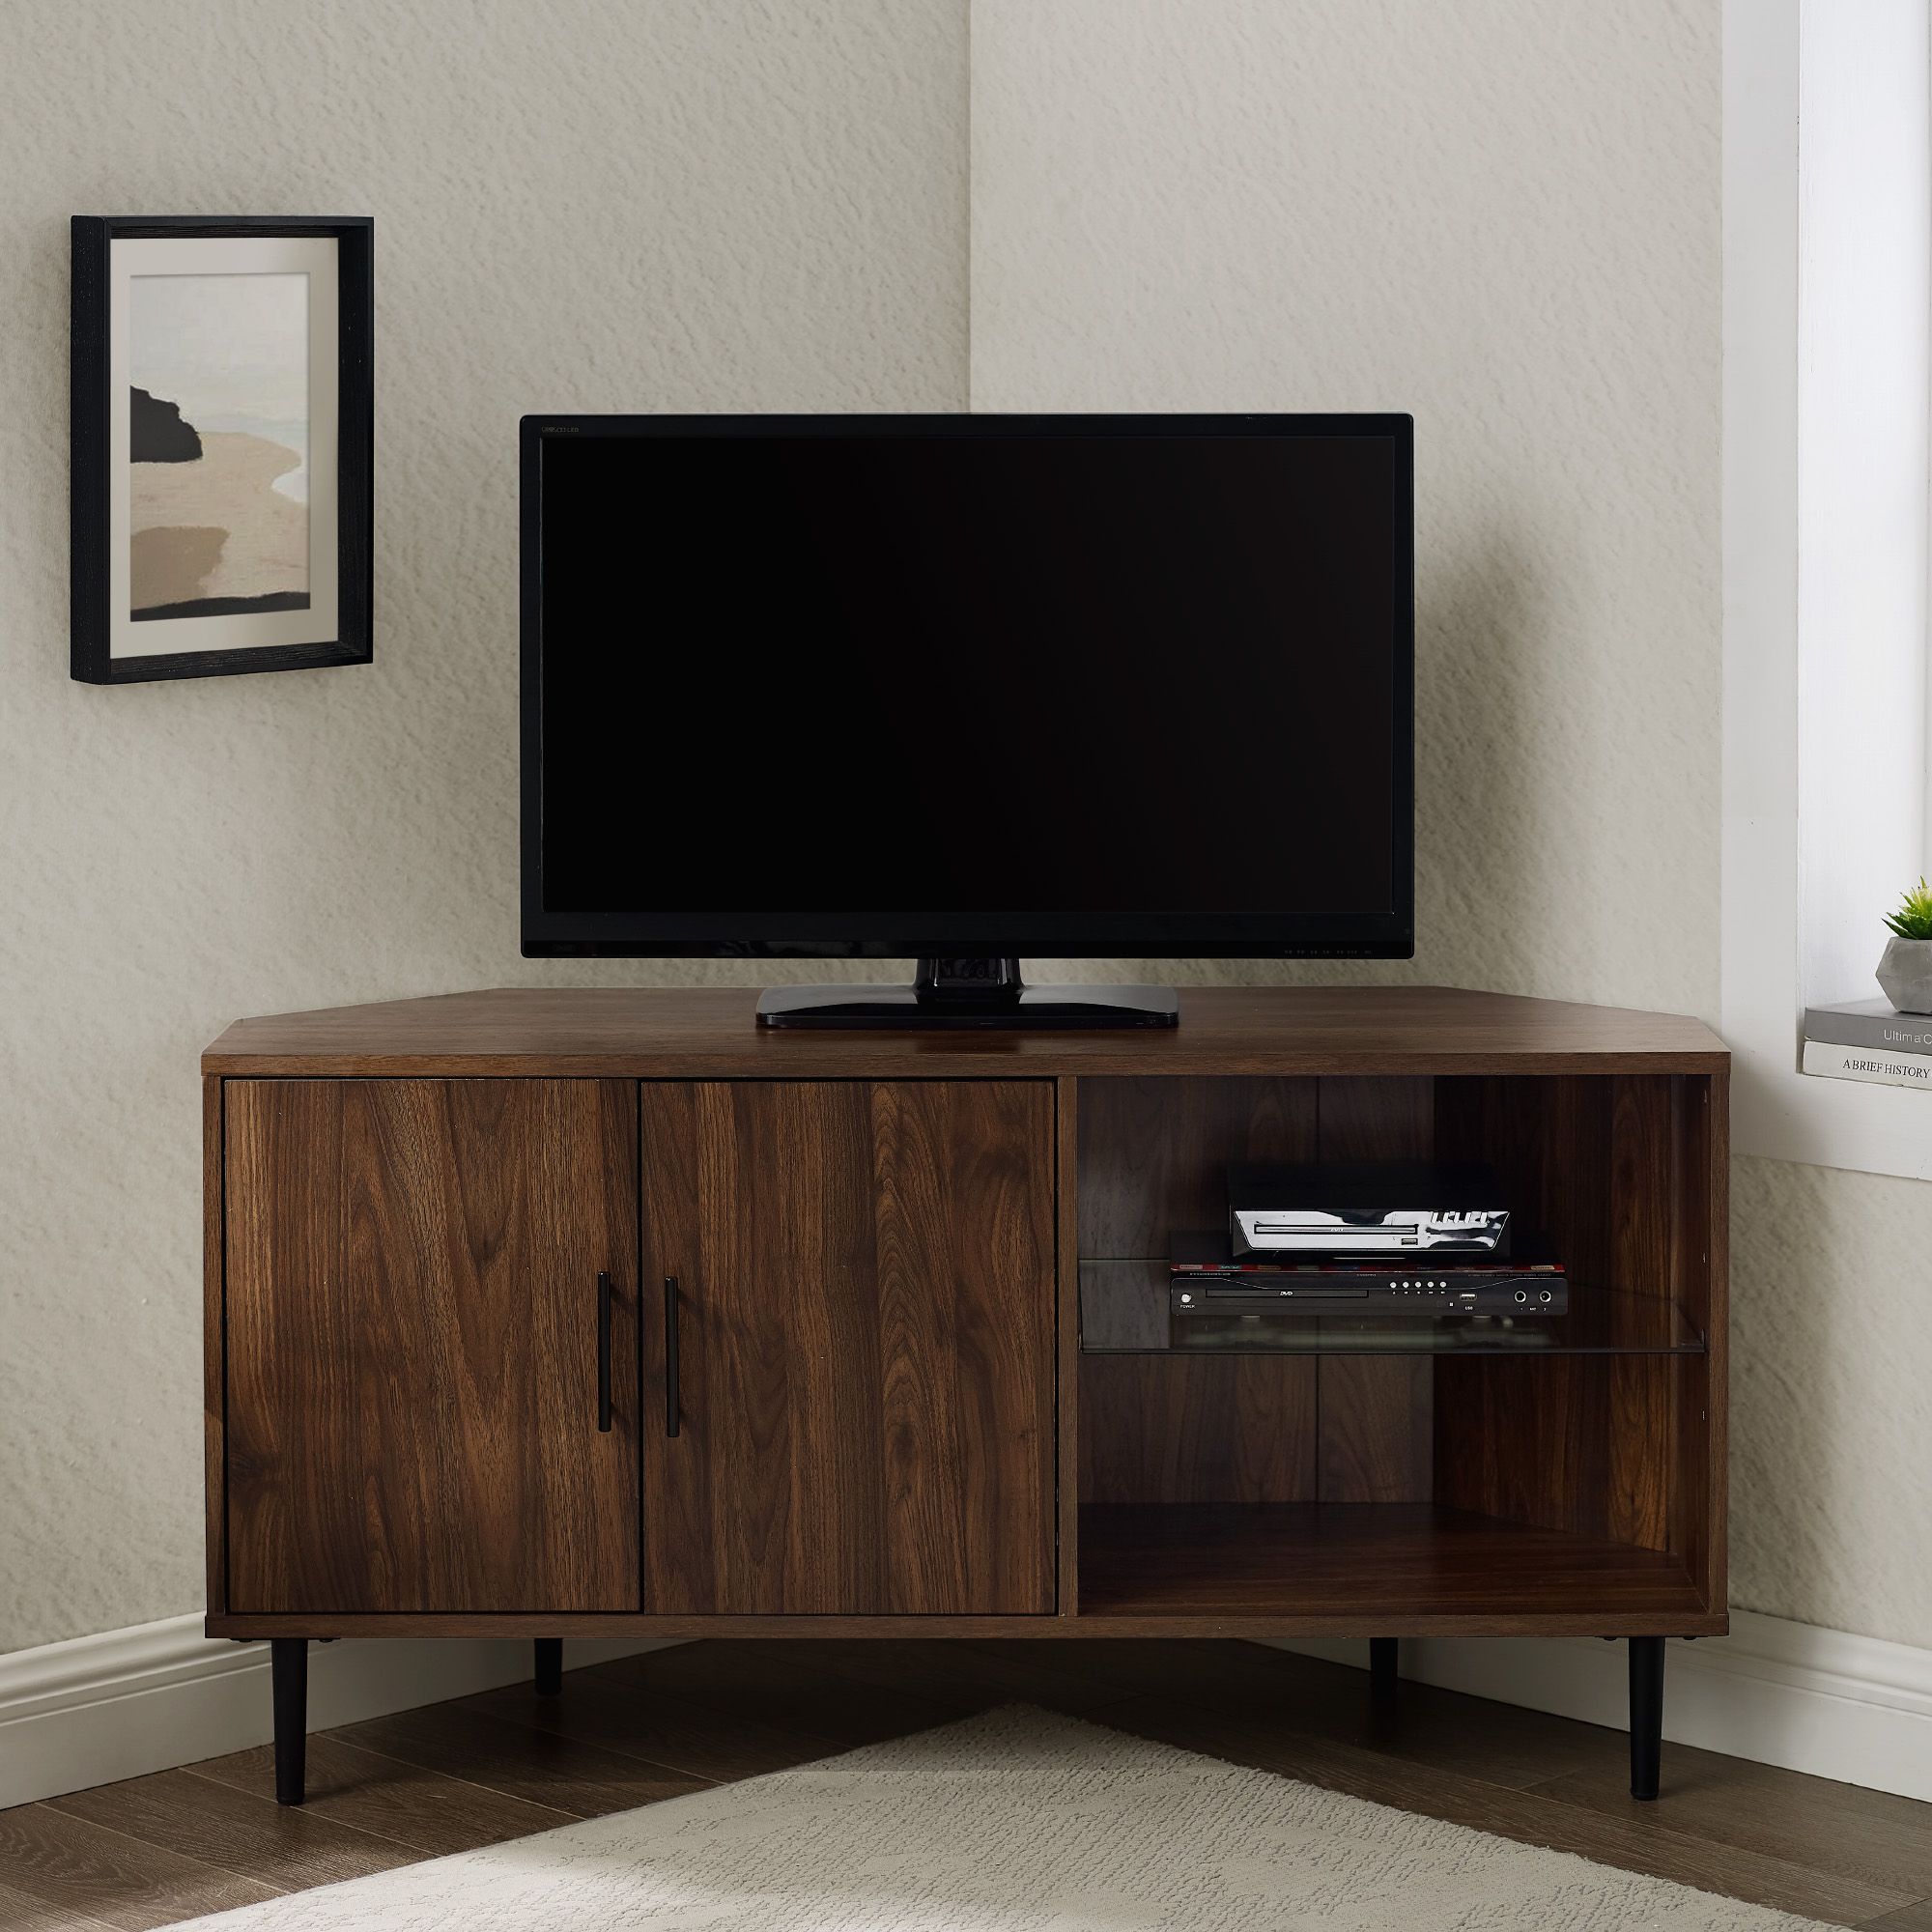 Manor Park Basie 2 Door Corner Tv Stand For Tvs Up To 55 For Twila Tv Stands For Tvs Up To 55" (View 7 of 15)